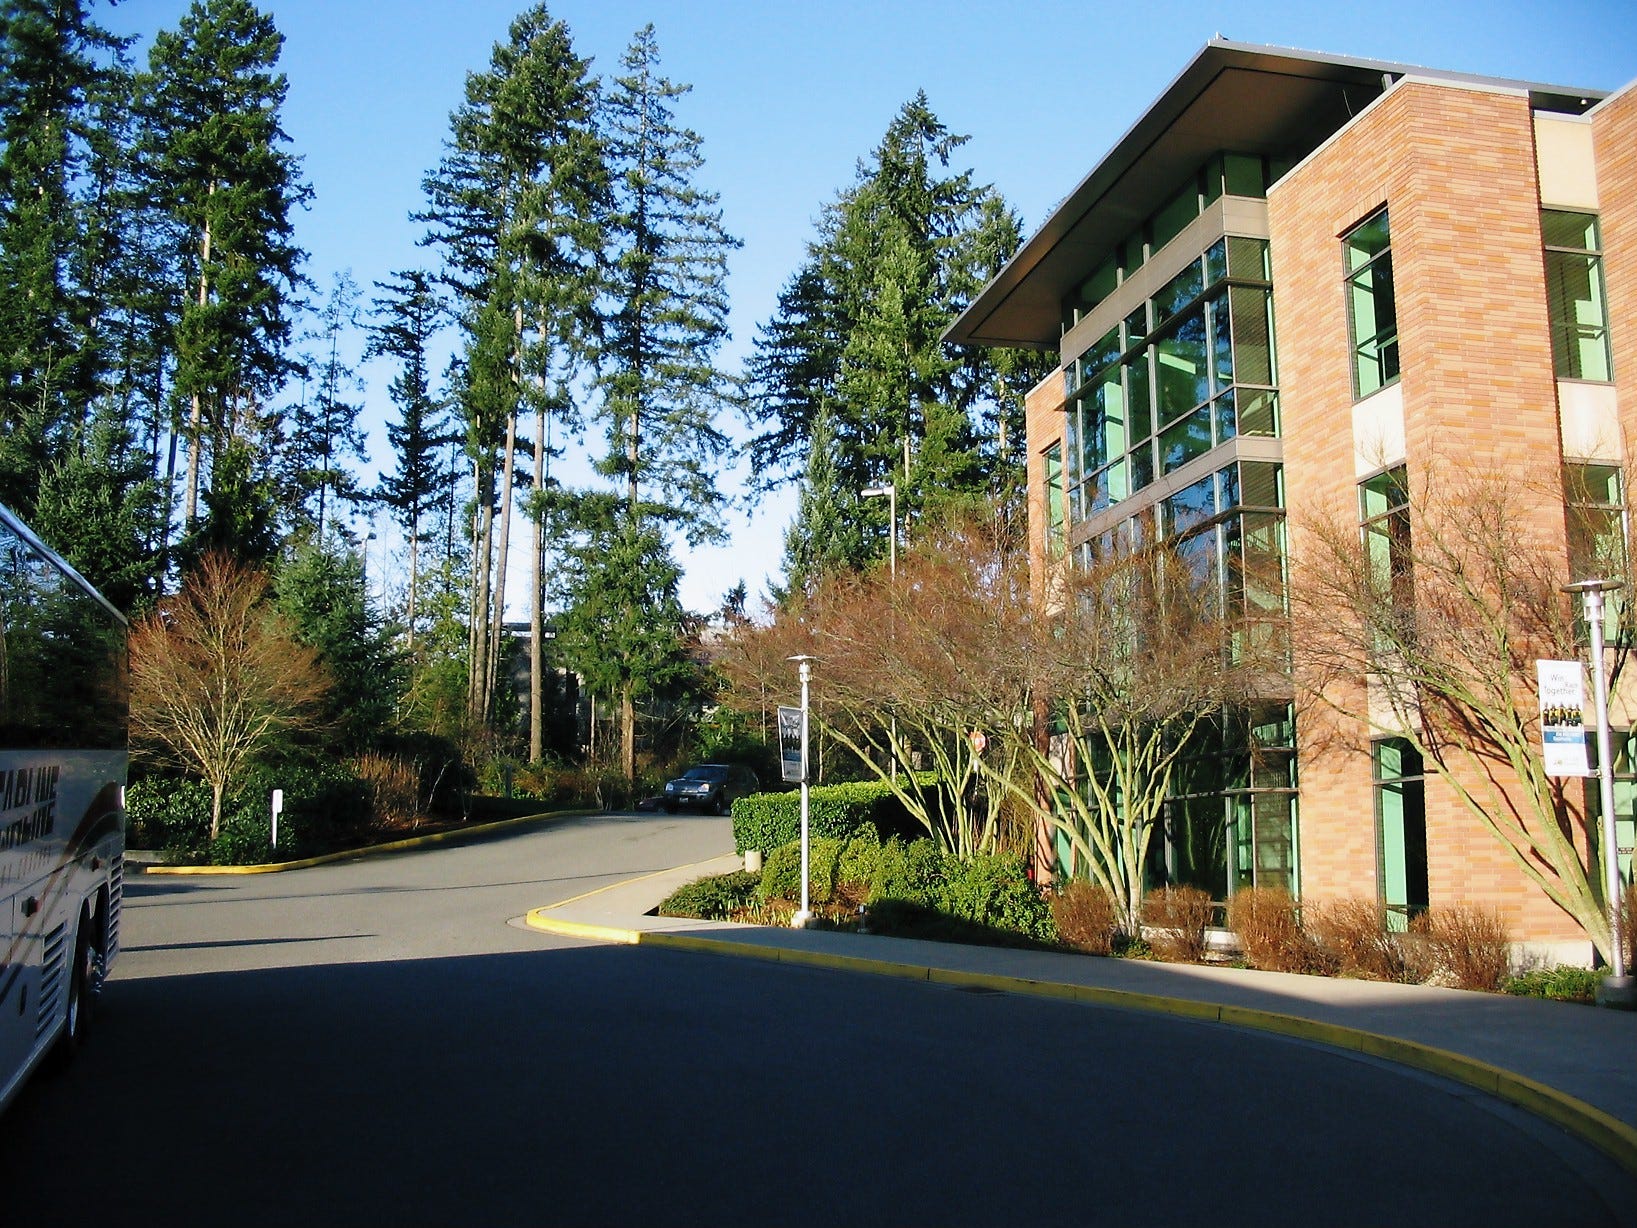 The Microsoft campus in Redmond, January 2006